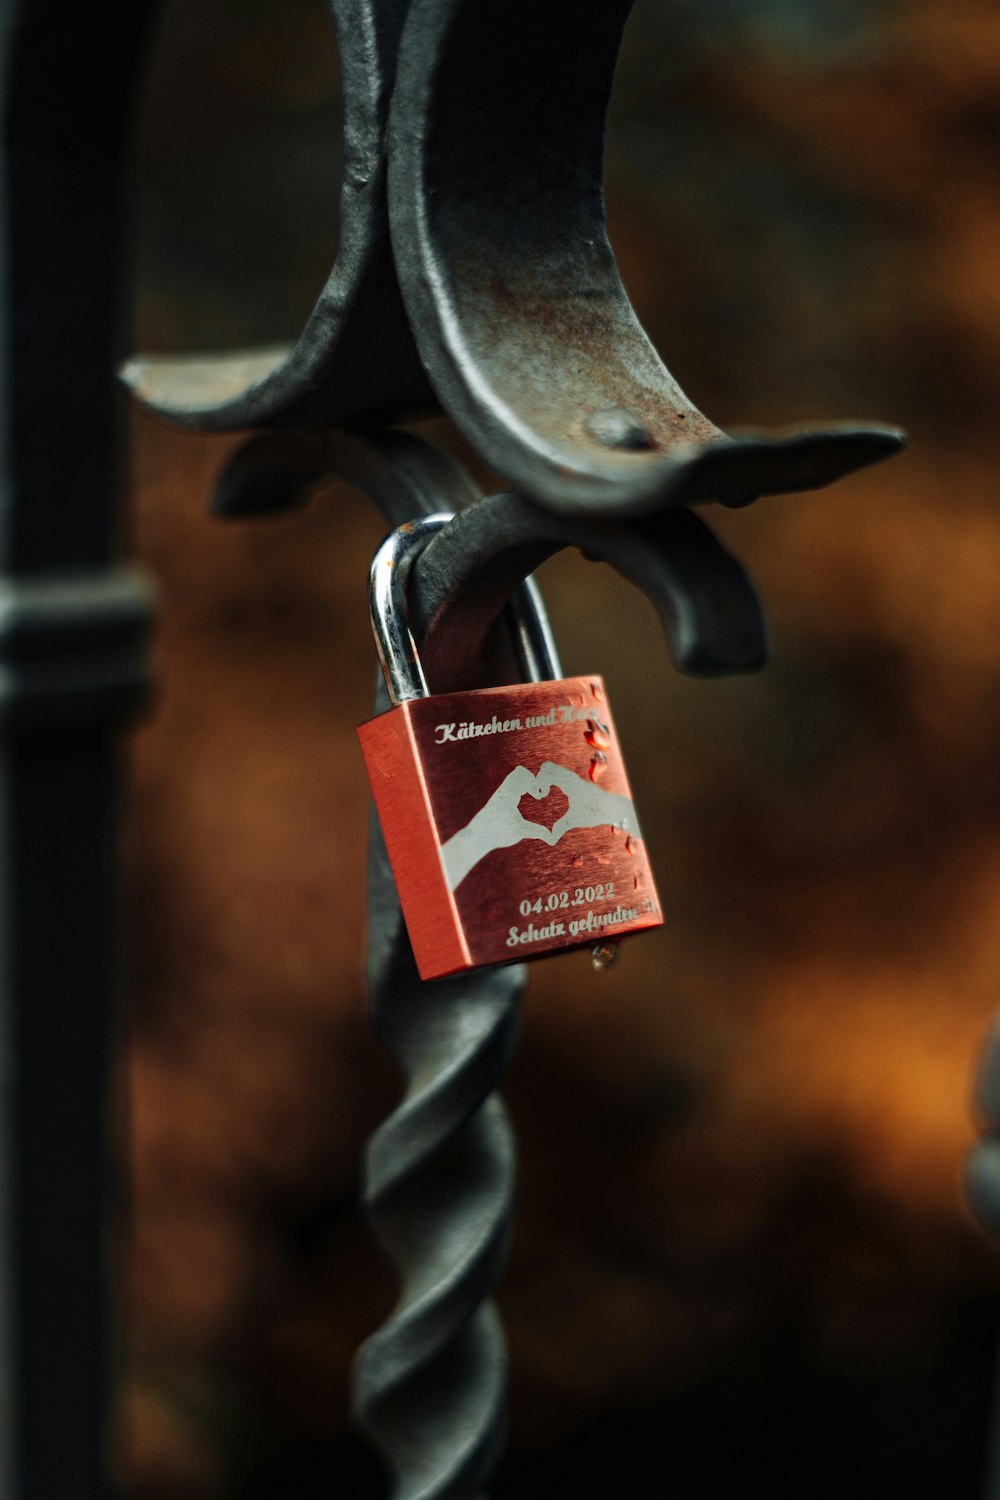 a red padlock attached to a metal gate